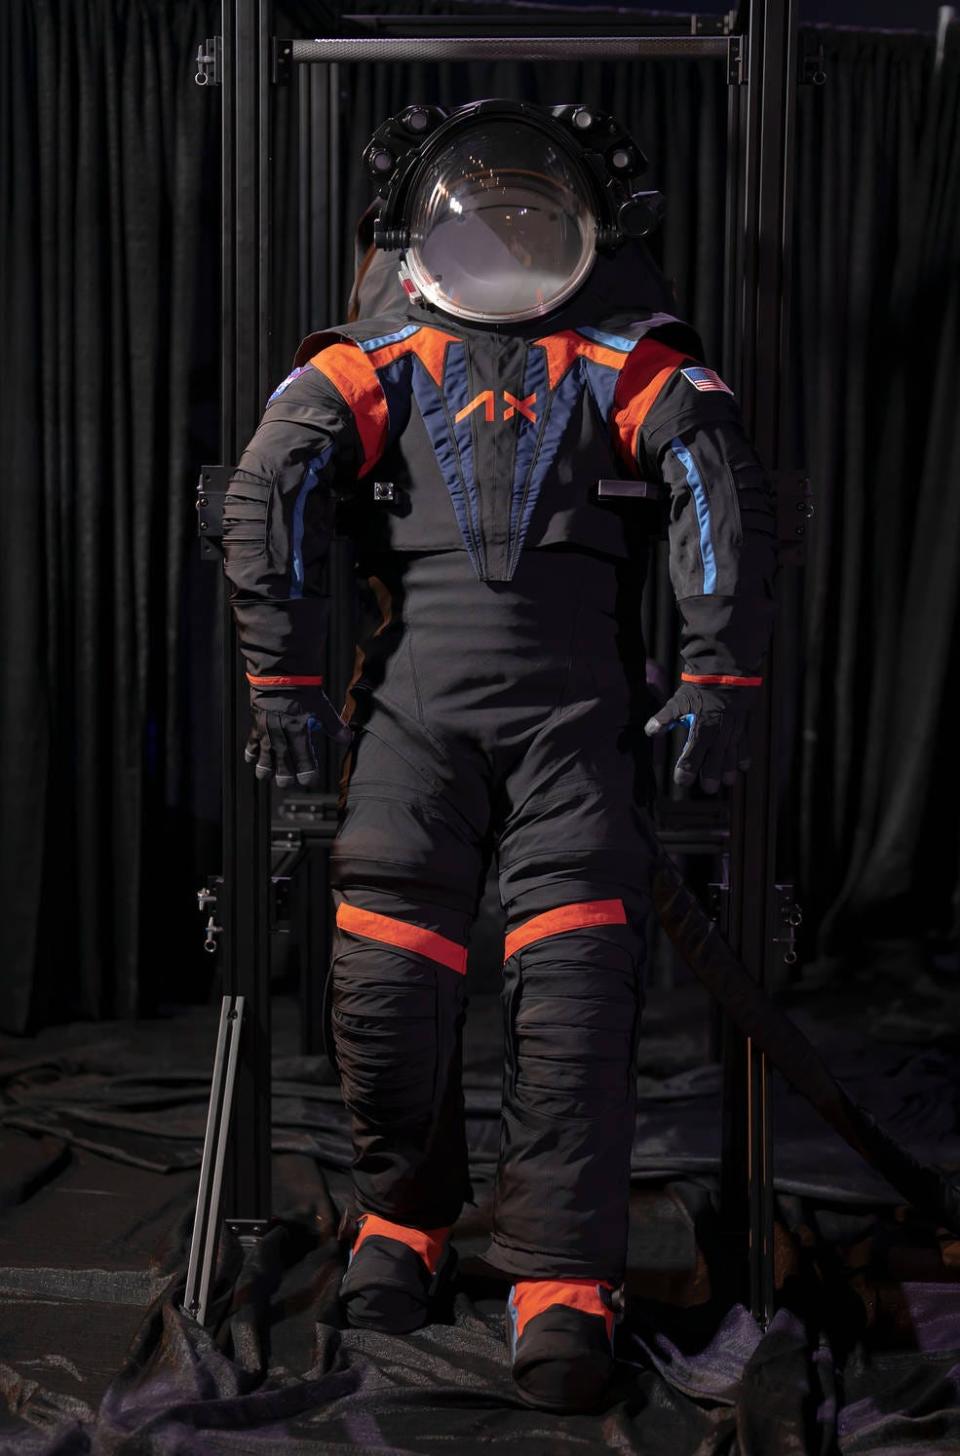 A prototype spacesuit for NASA's Artemis III mission is shown. The final version of the suit will likely be all-white, NASA said.